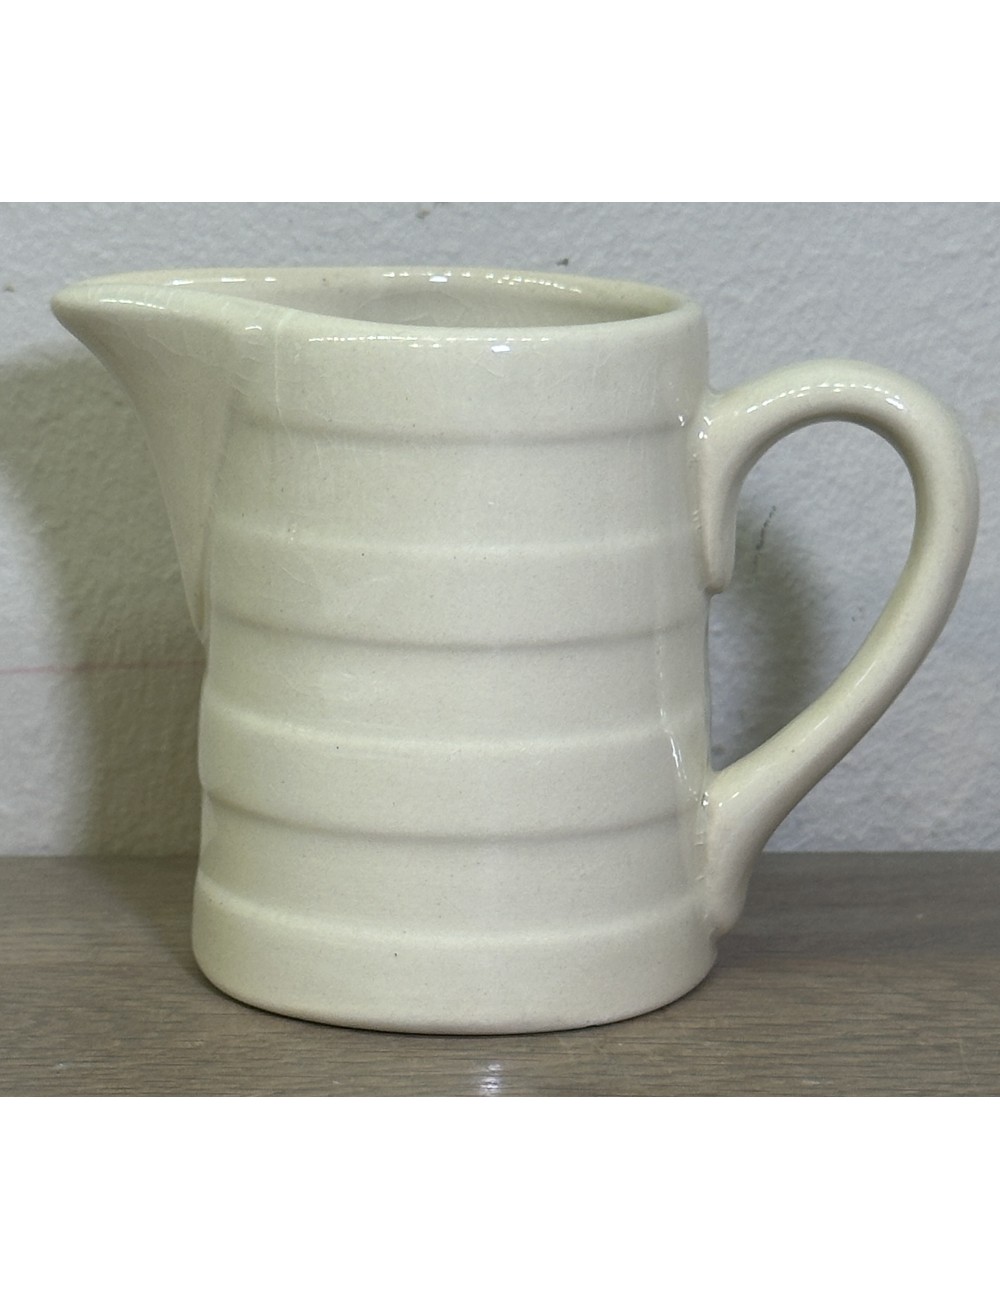 Water jug / Milk jug - small model - Boch Frères -executed in creamy white/beige